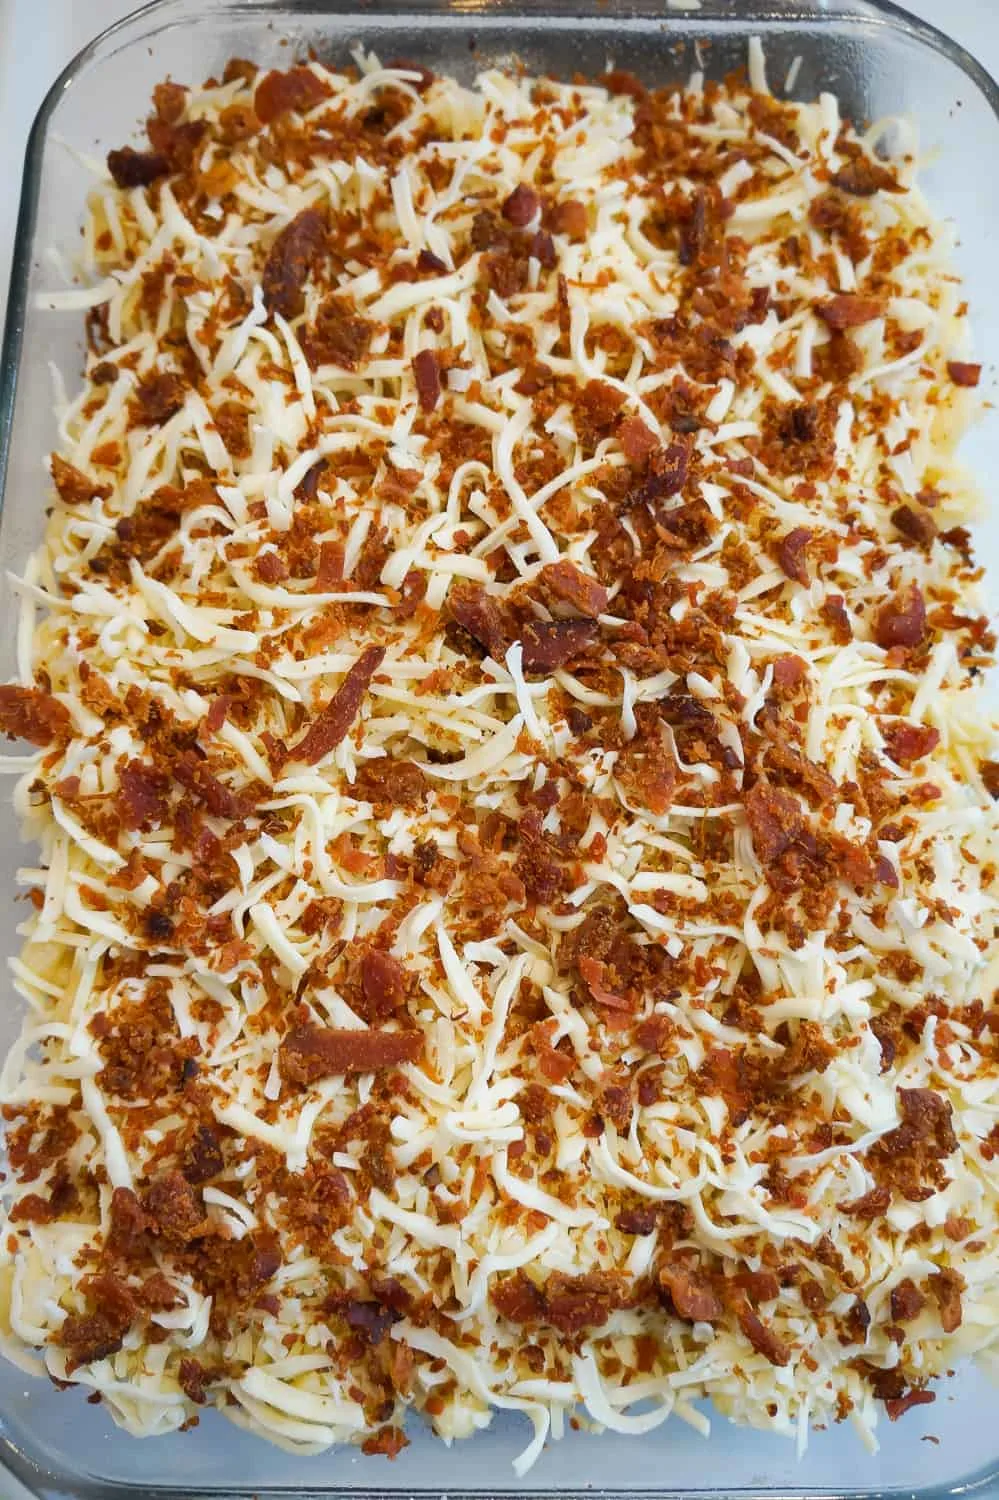 shredded Parmesan, shredded mozzarella and crumbled bacon on top of pasta in a baking dish